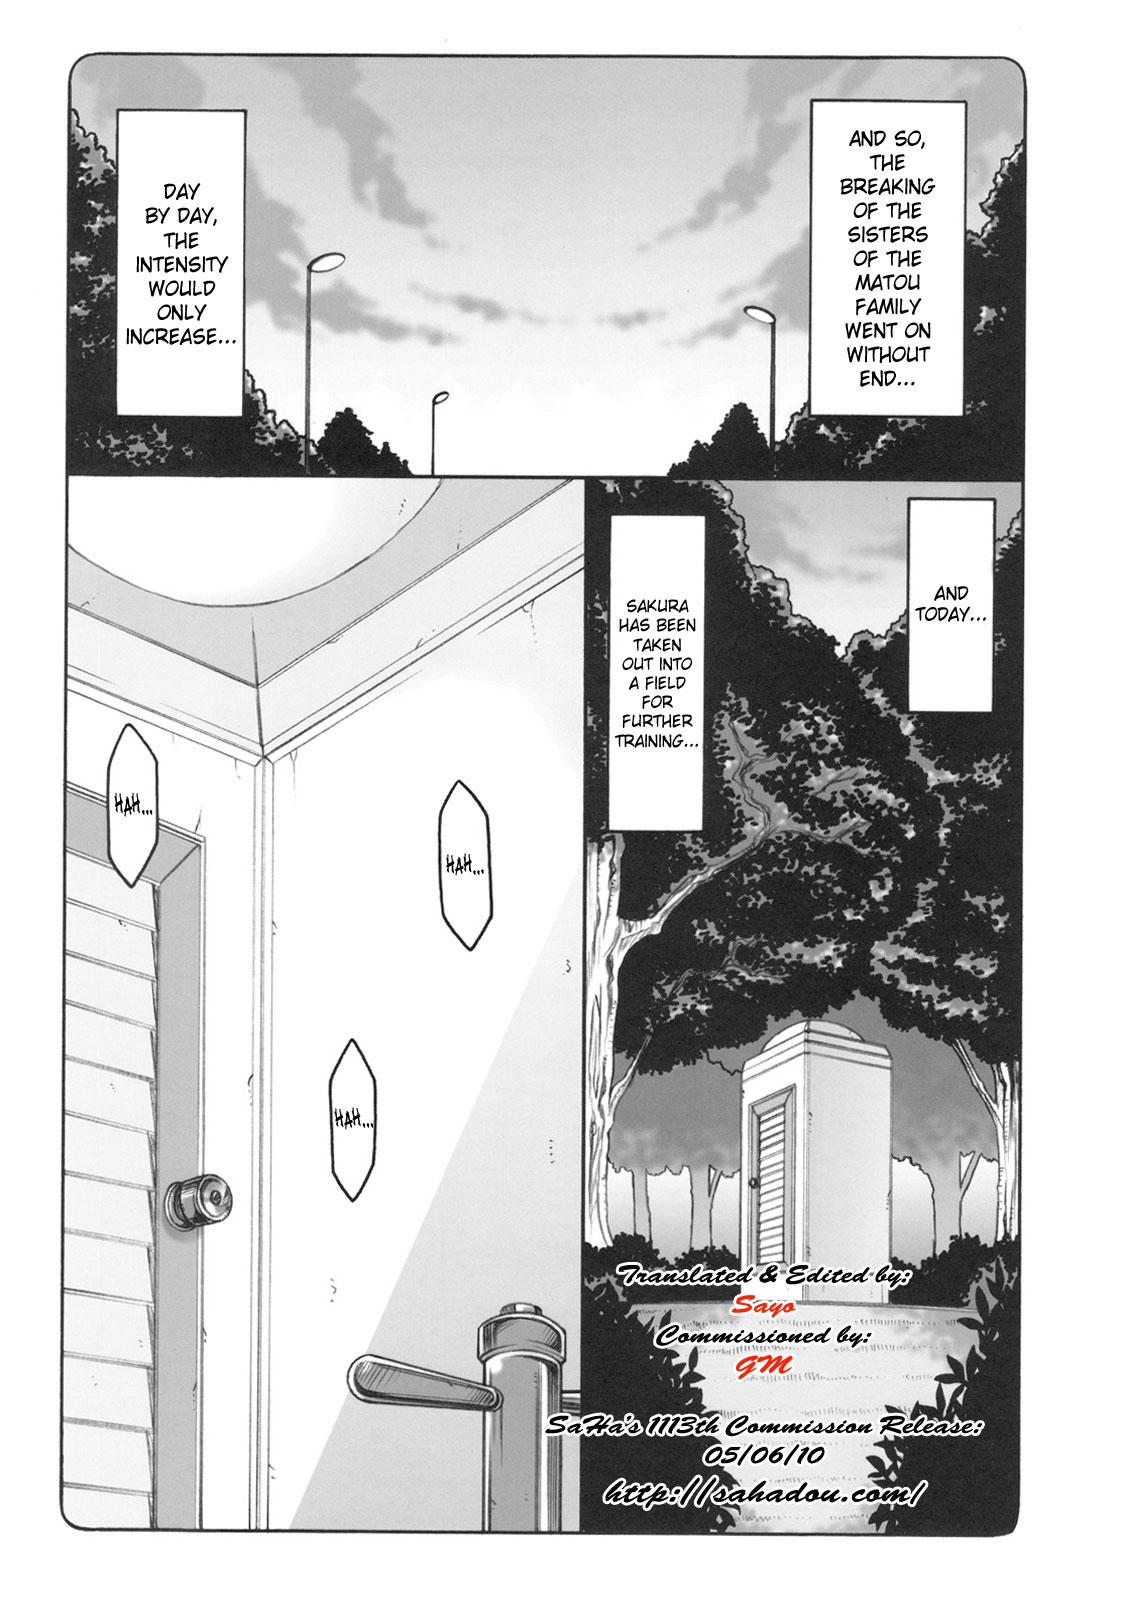 Smooth Kotori 5 - Fate stay night Uncensored - Page 4